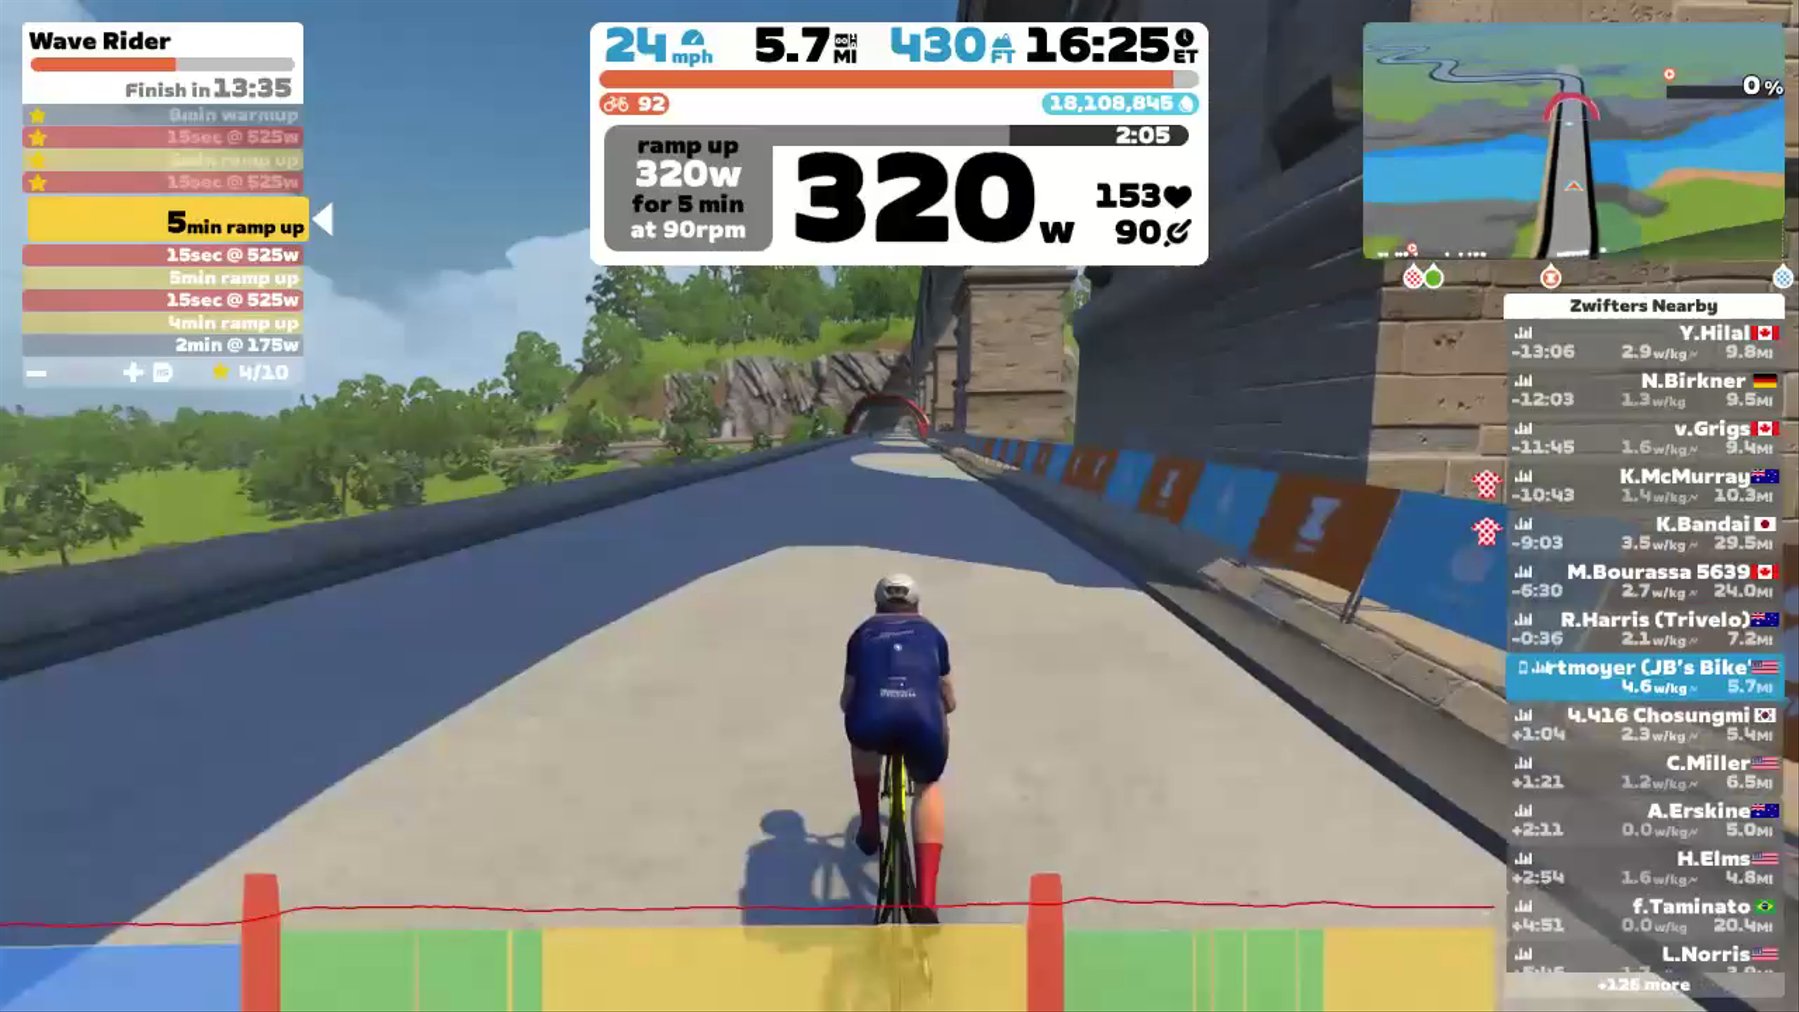 Zwift - Wave Rider in France